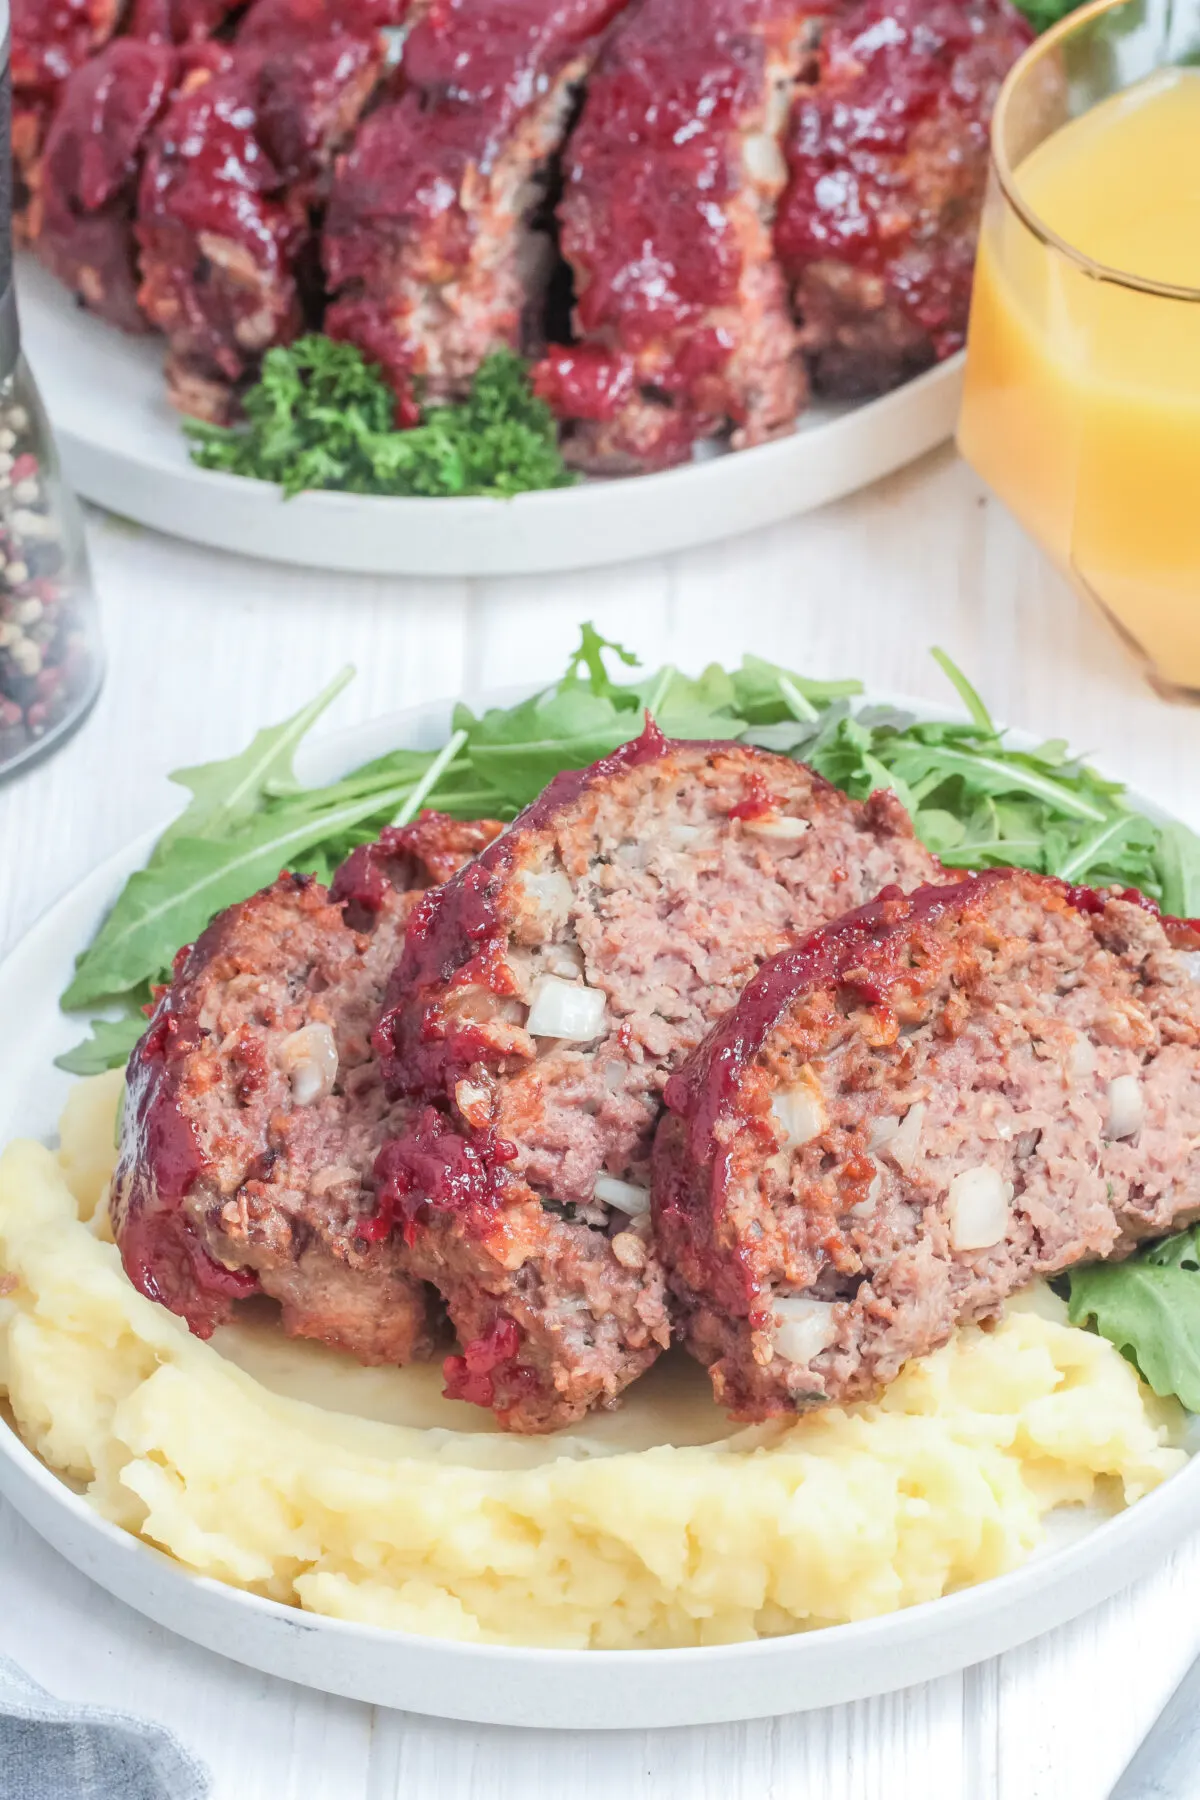 This delicious and easy air fryer meatloaf recipe is perfect for a quick and hearty meal on busy weeknights.